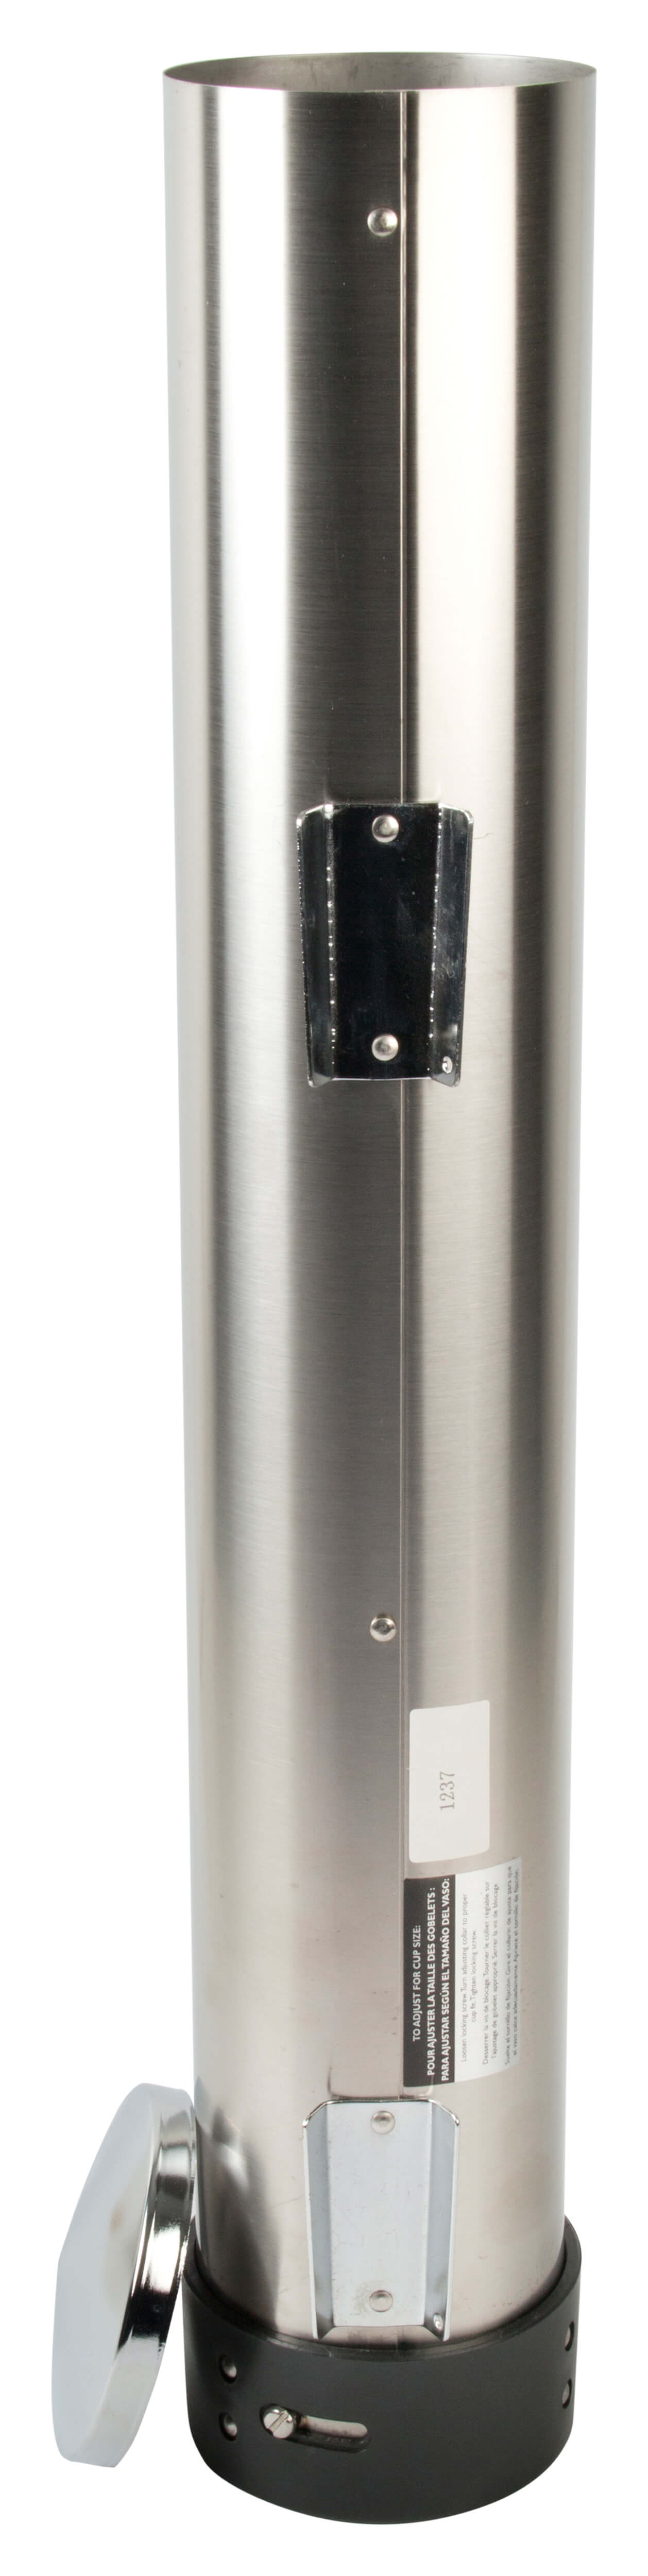 Cup Dispenser 'Pull', stainless steel - for cups 0,1l - 0,2l